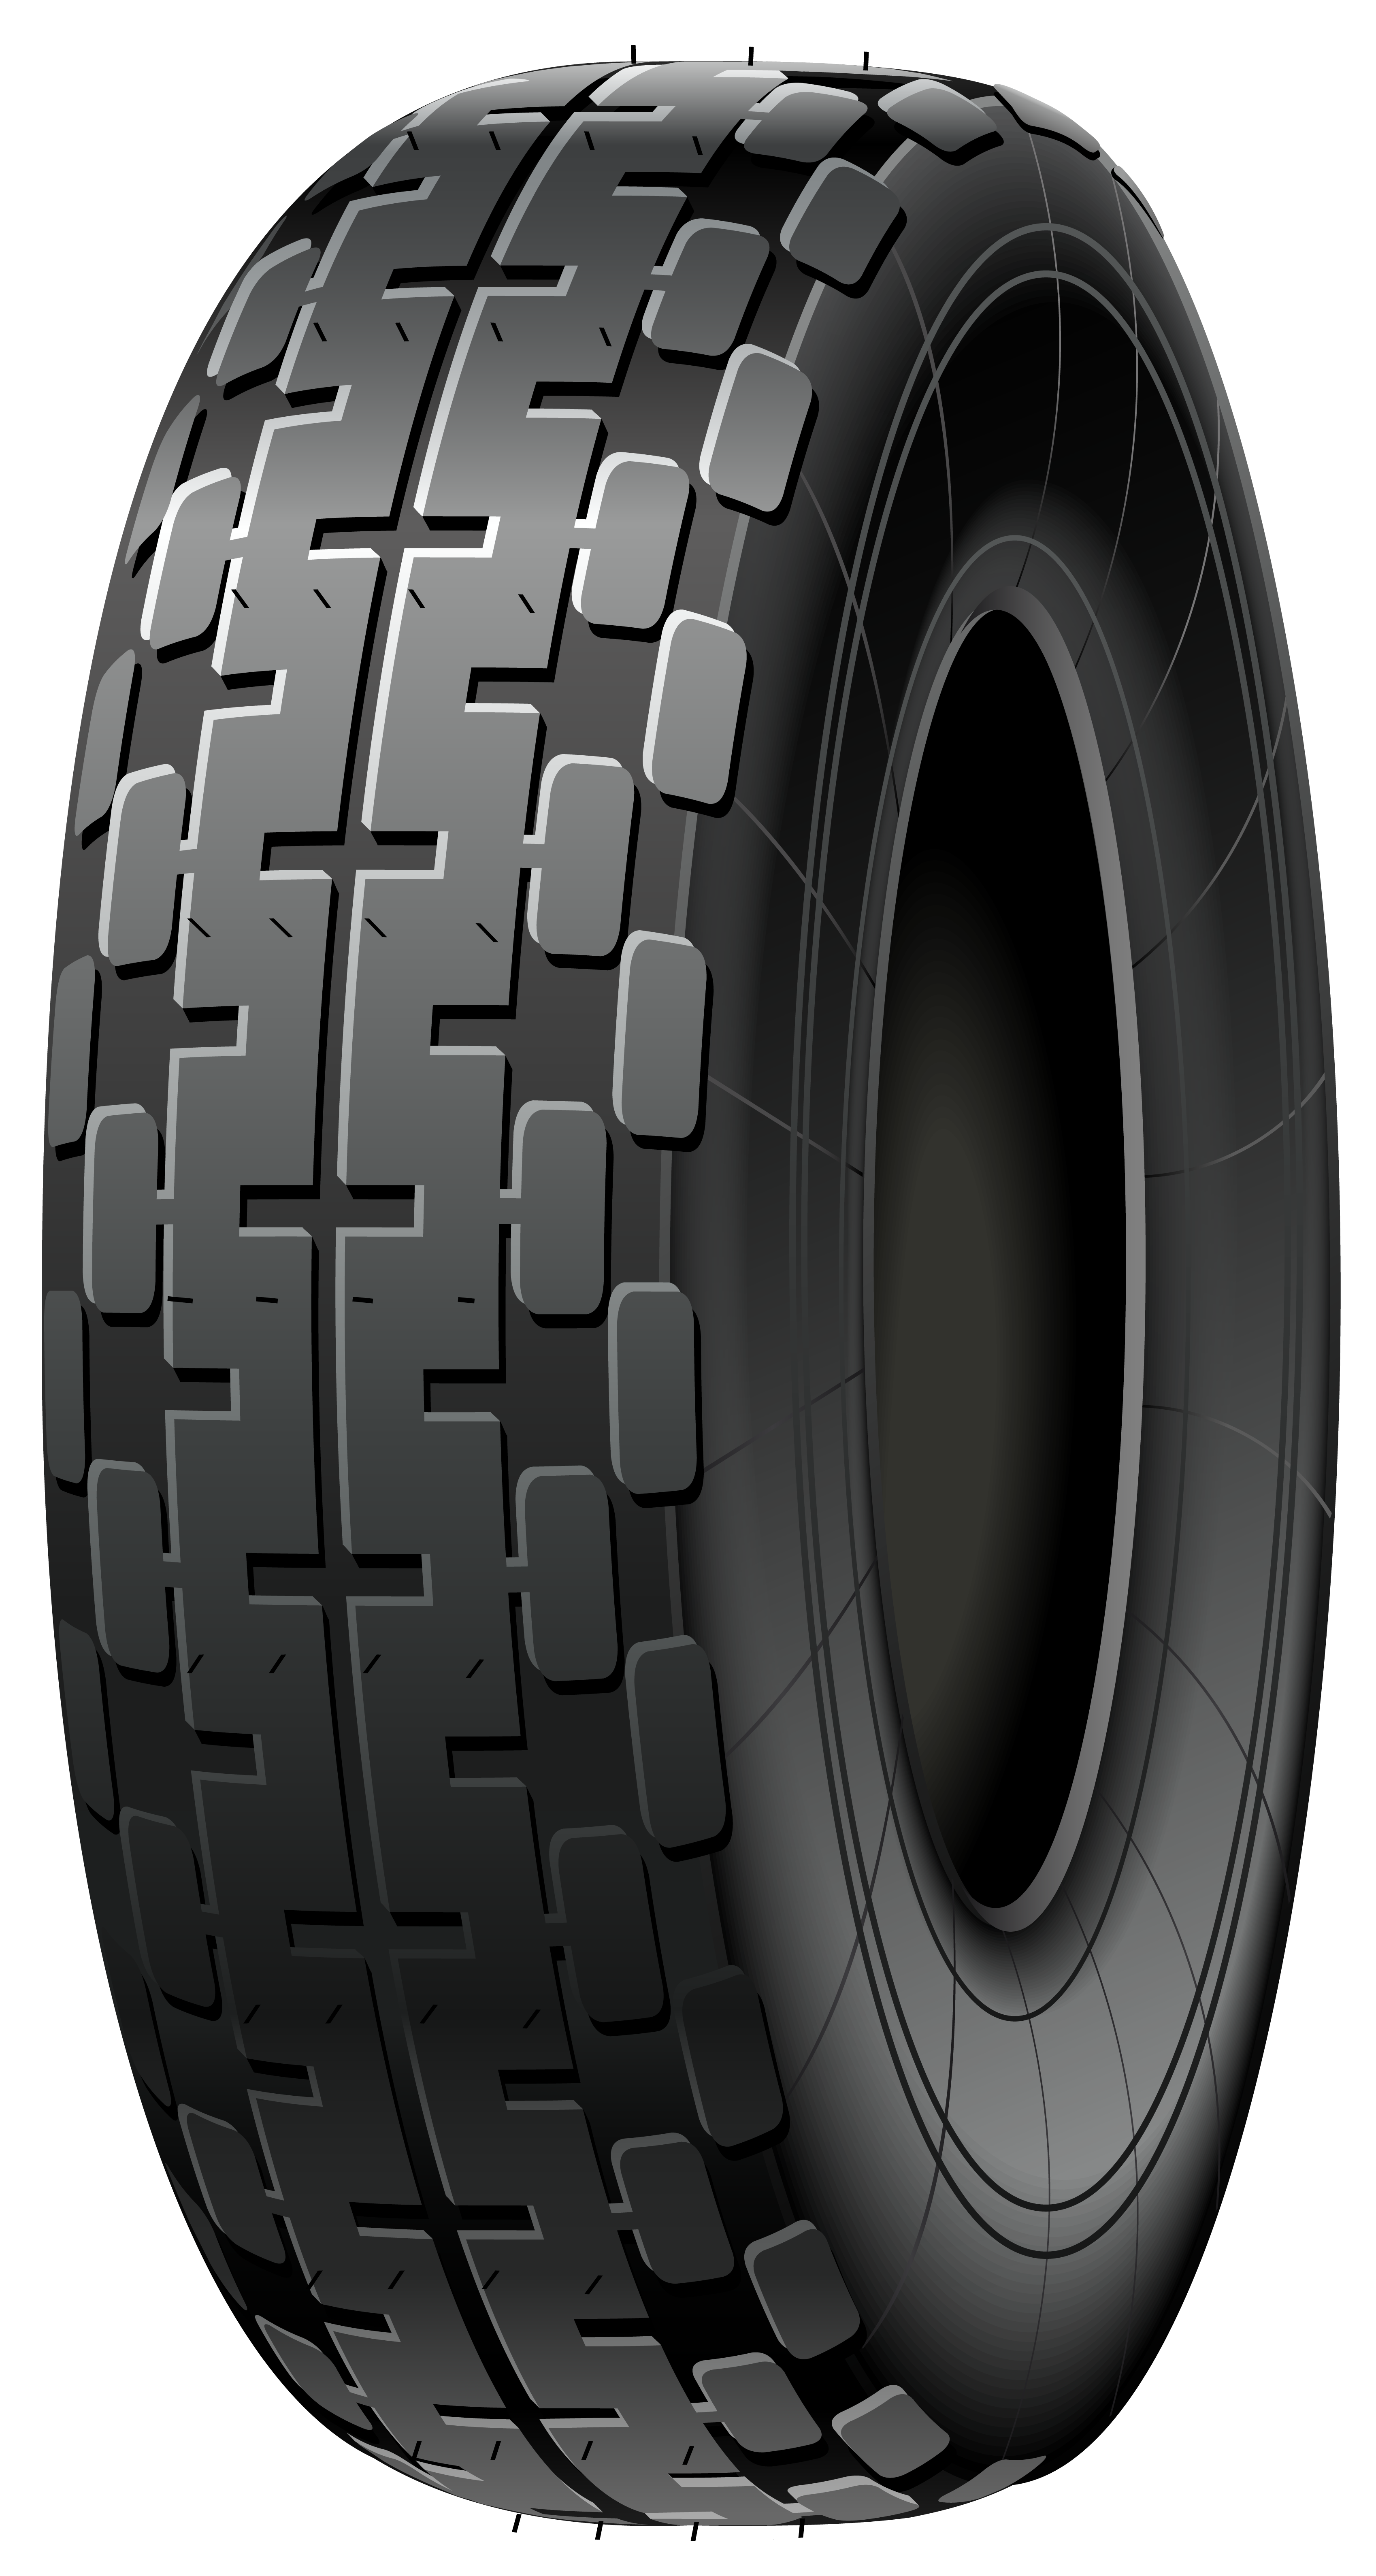 Black car tire png. Wheel clipart tyre